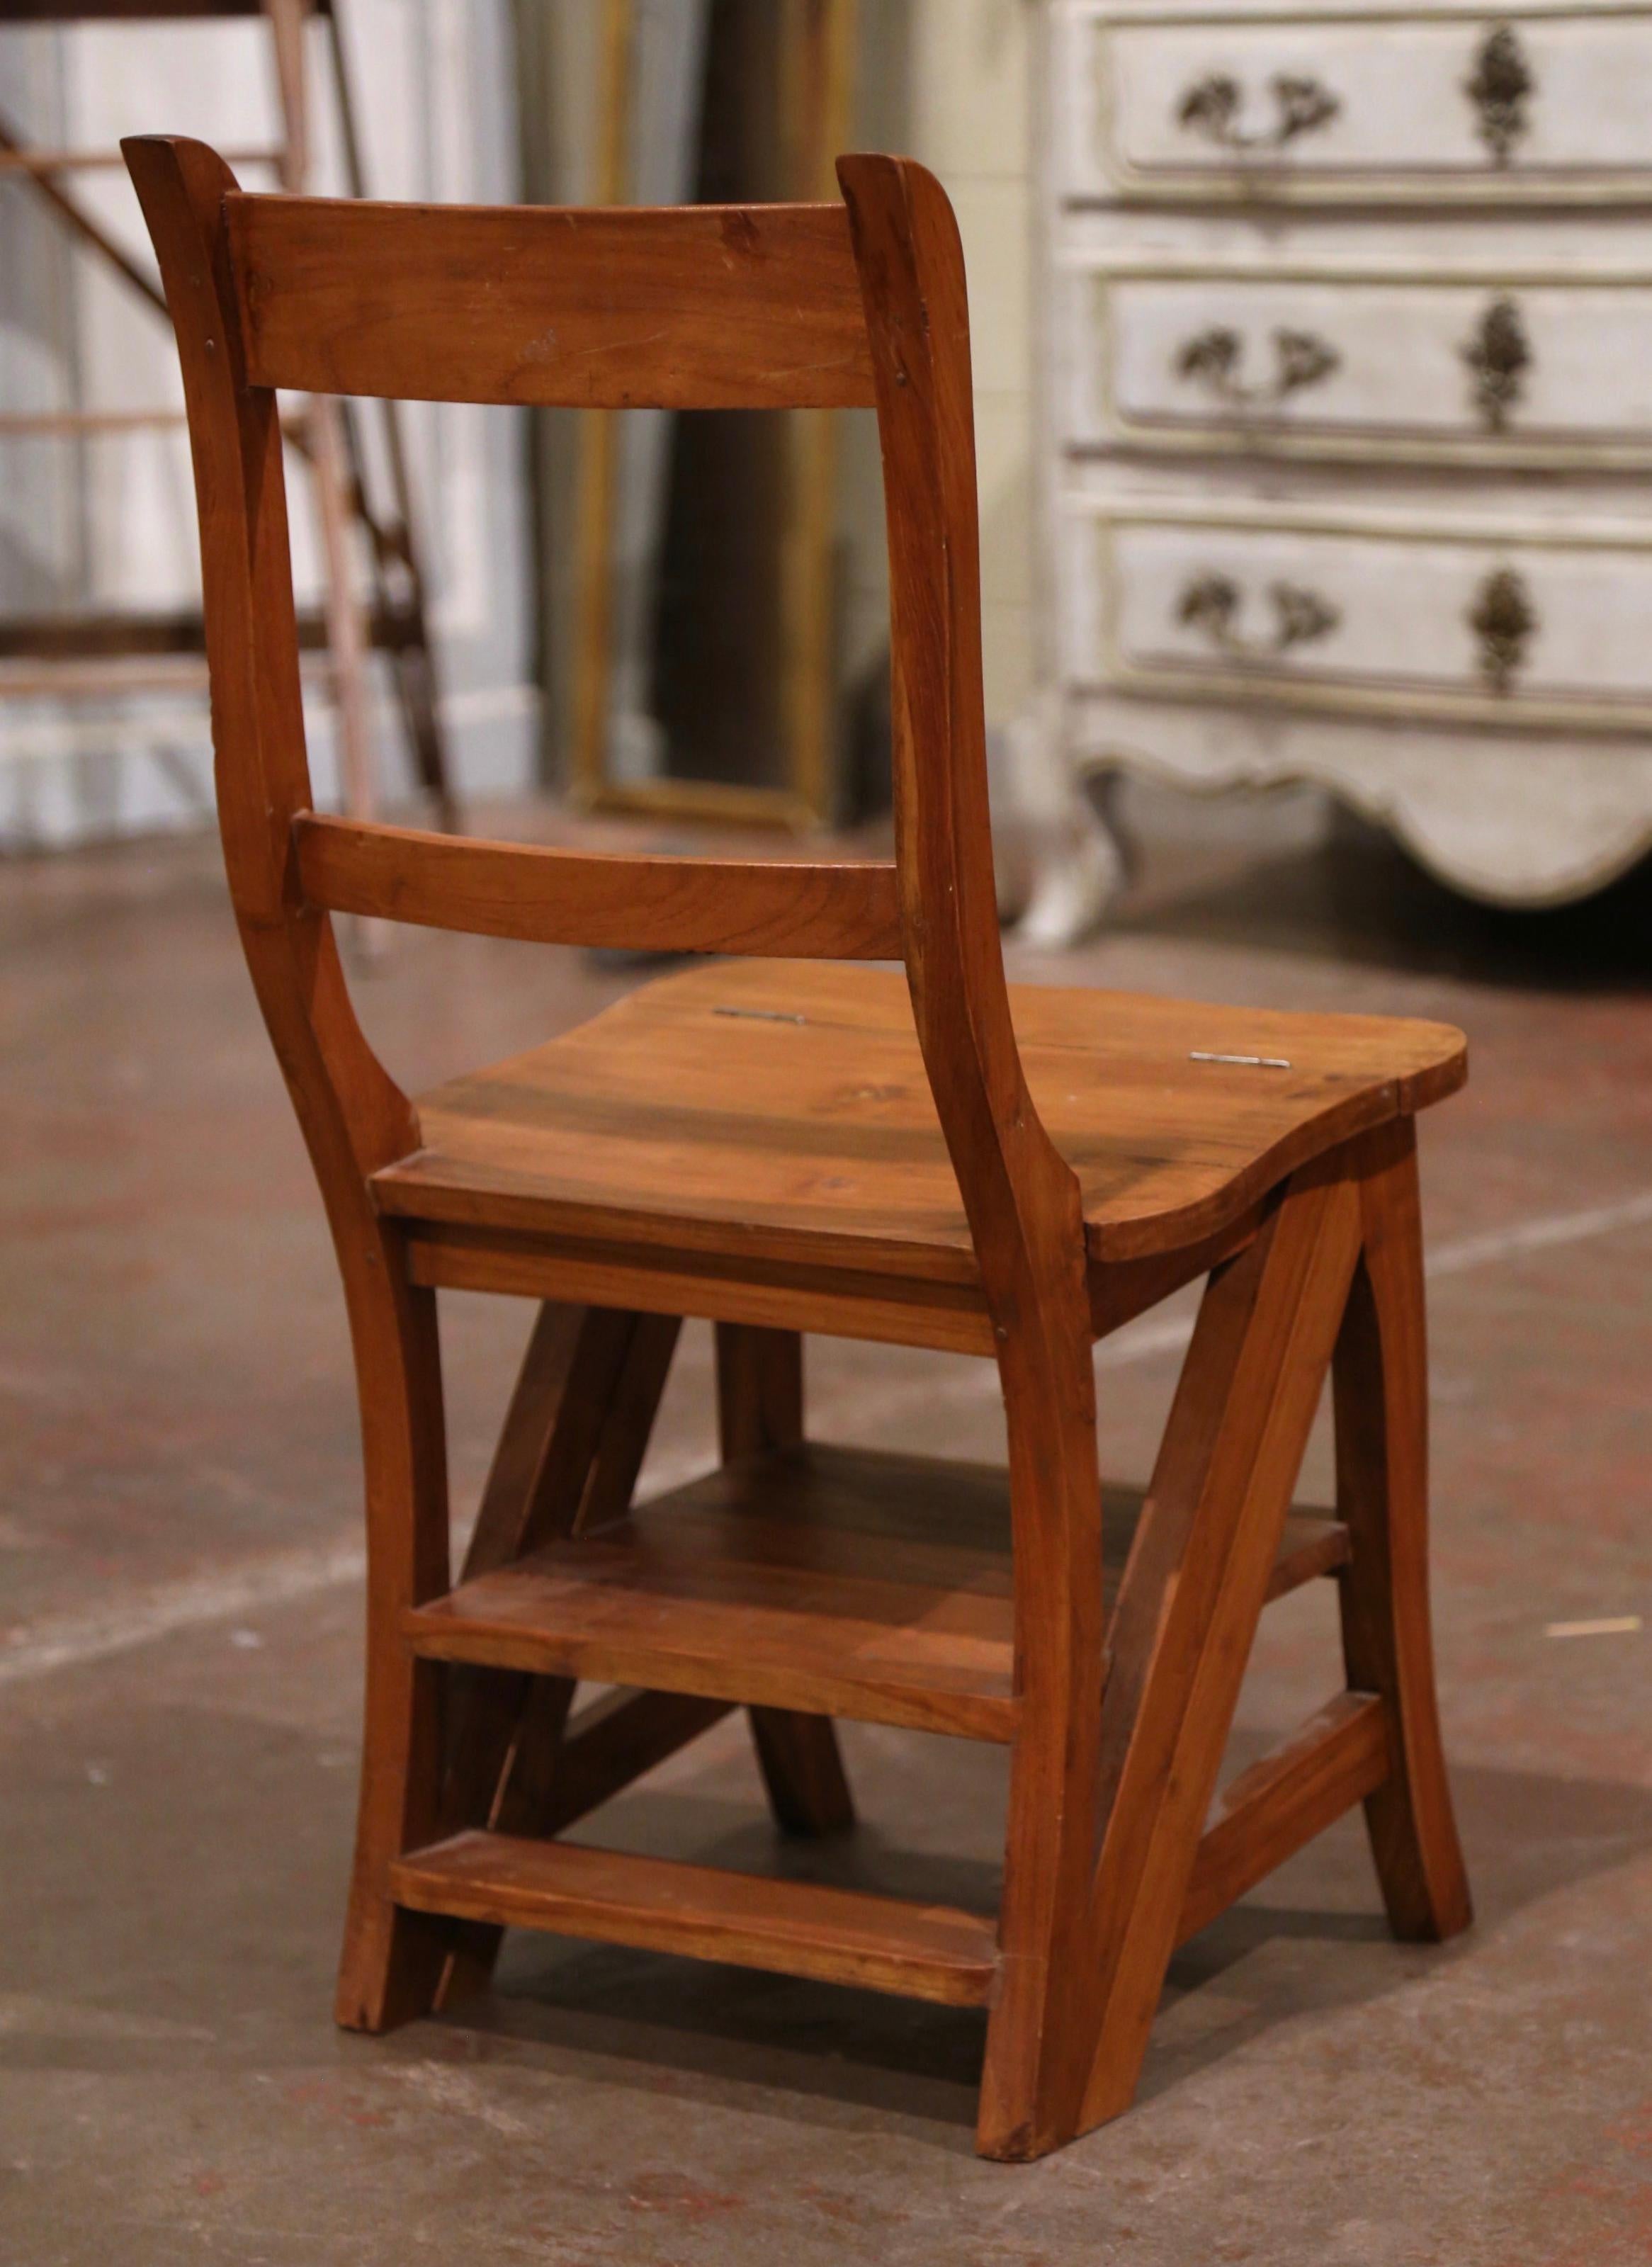 Early 20th Century French Carved Chestnut Chair Folding Step Ladder 2